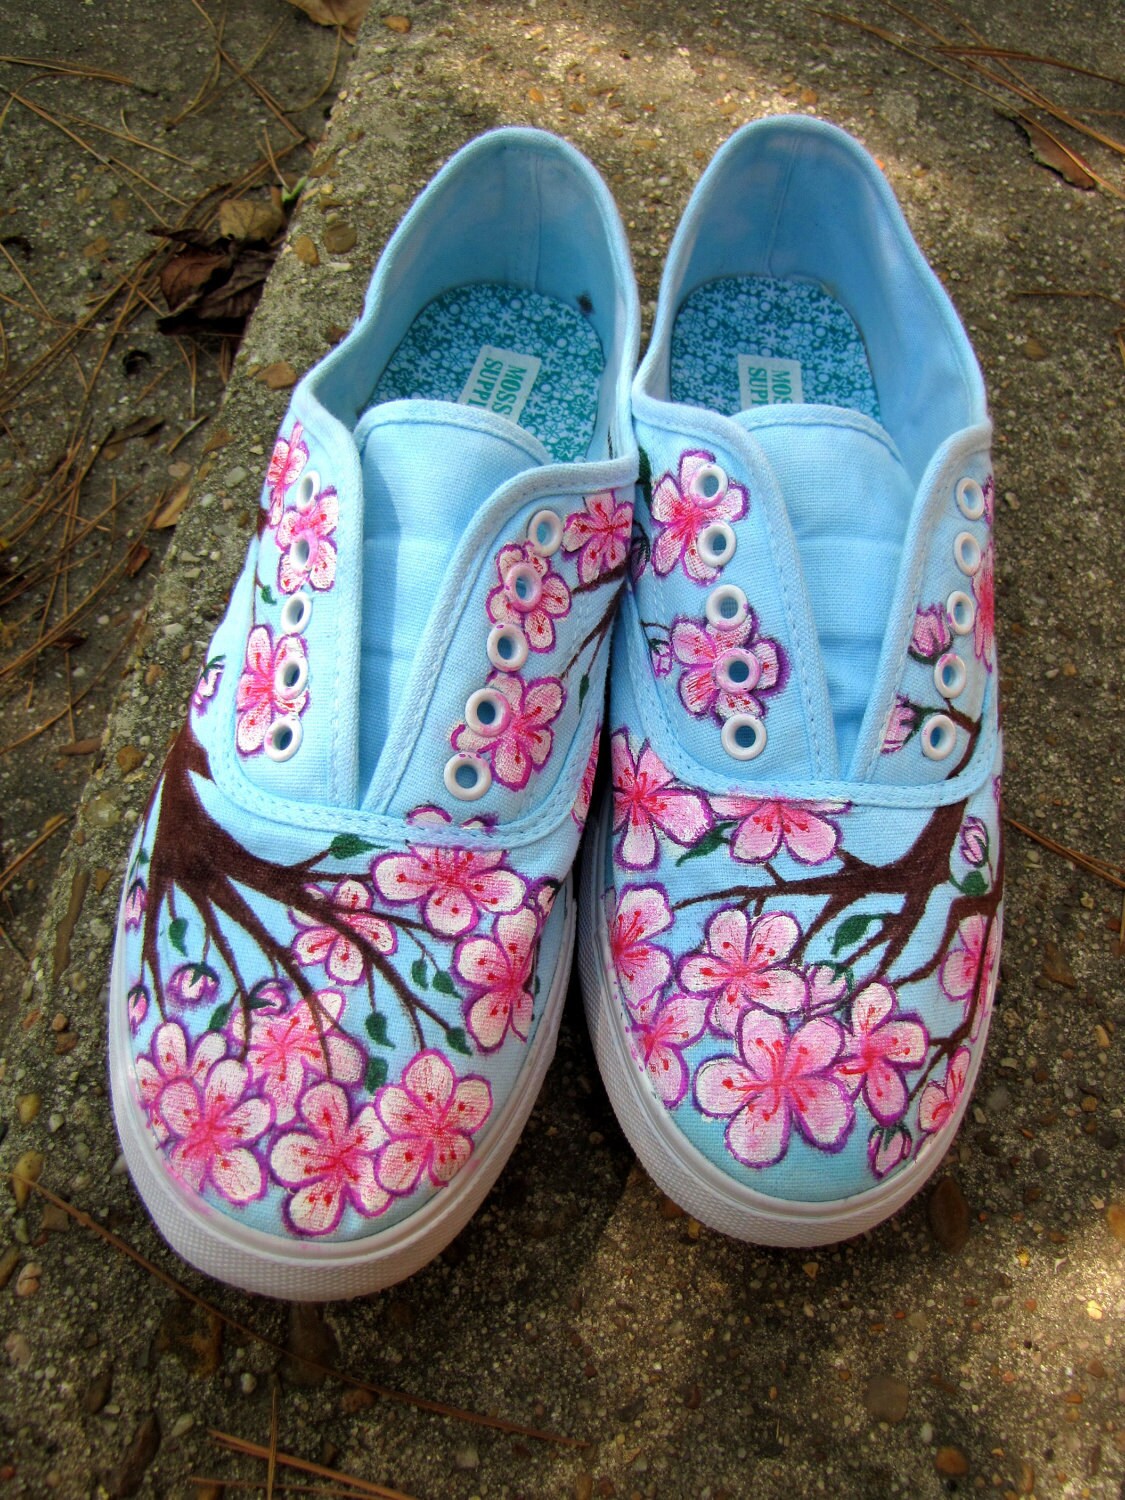 Japanese Cherry Blossom Shoes